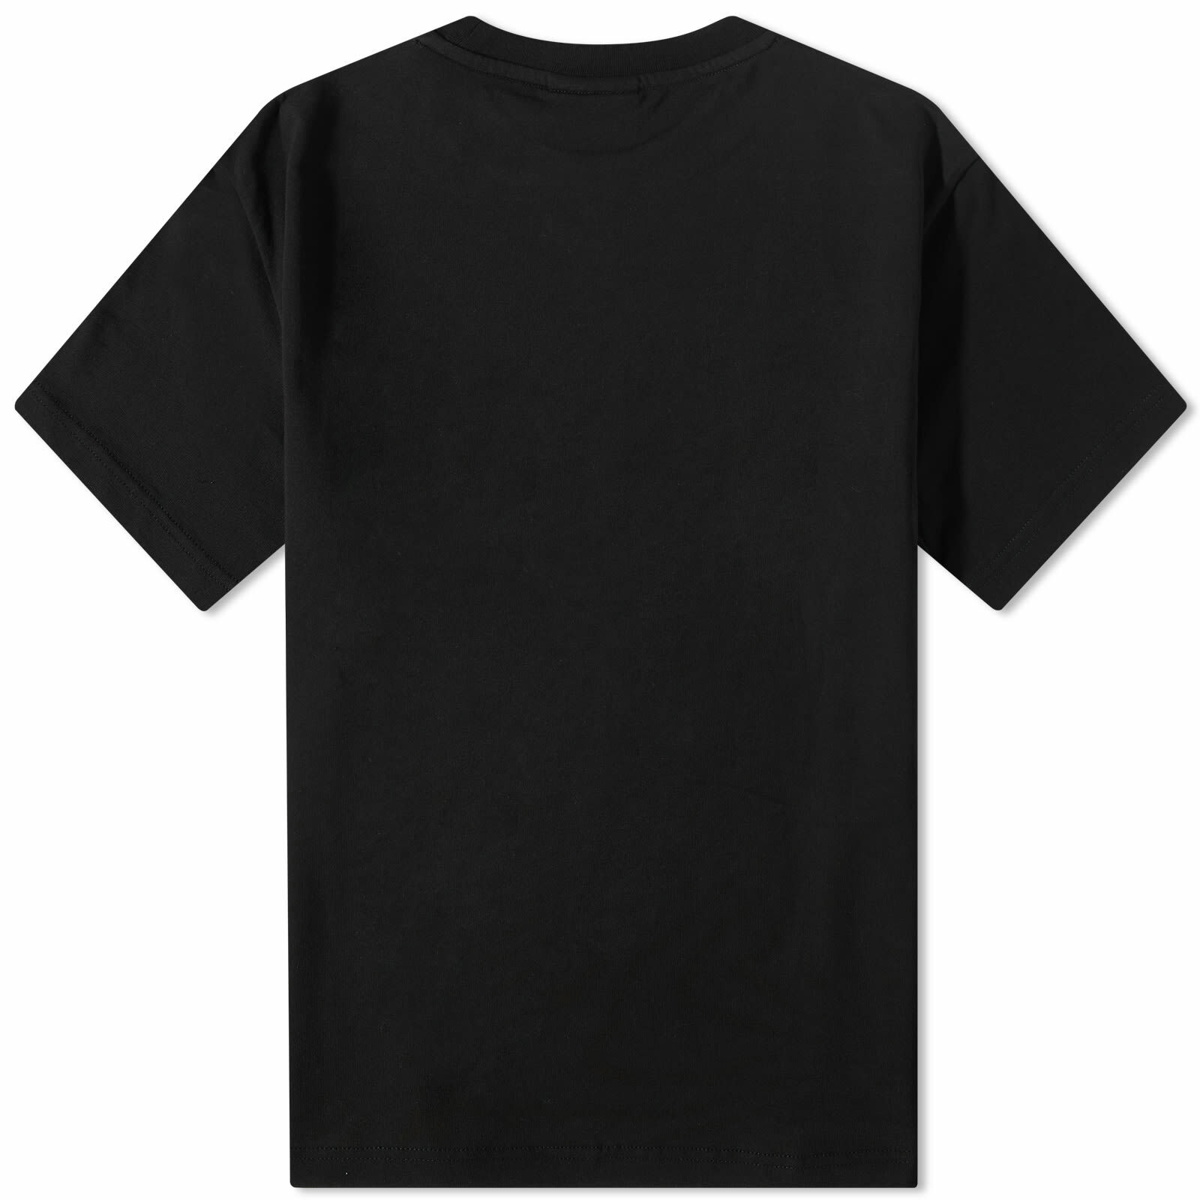 Grand Collection Tompkins T-Shirt in Black Grand Collection